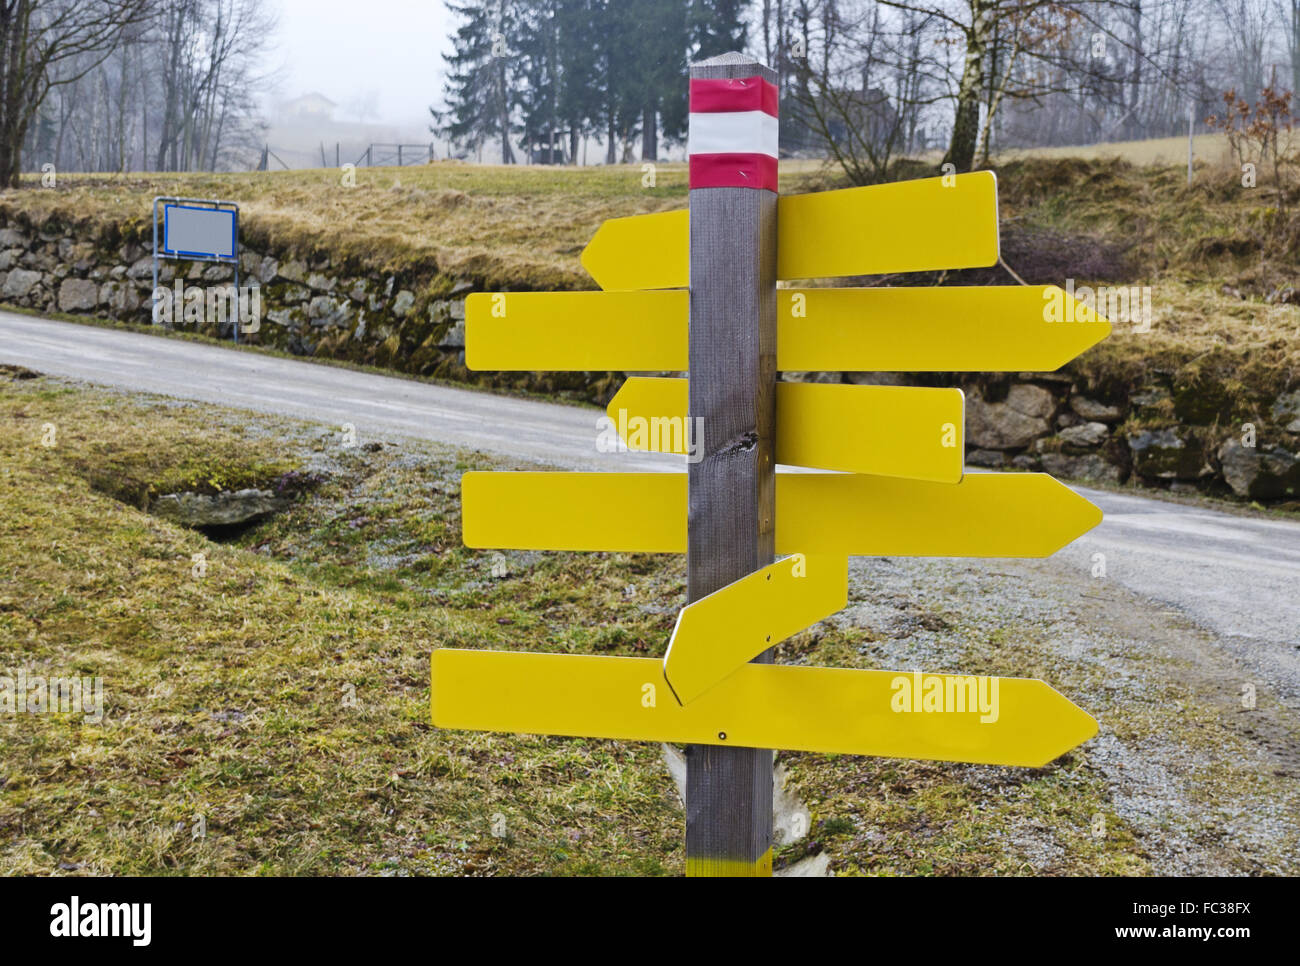 wooden pole with yellow unlabeled signposts Stock Photo